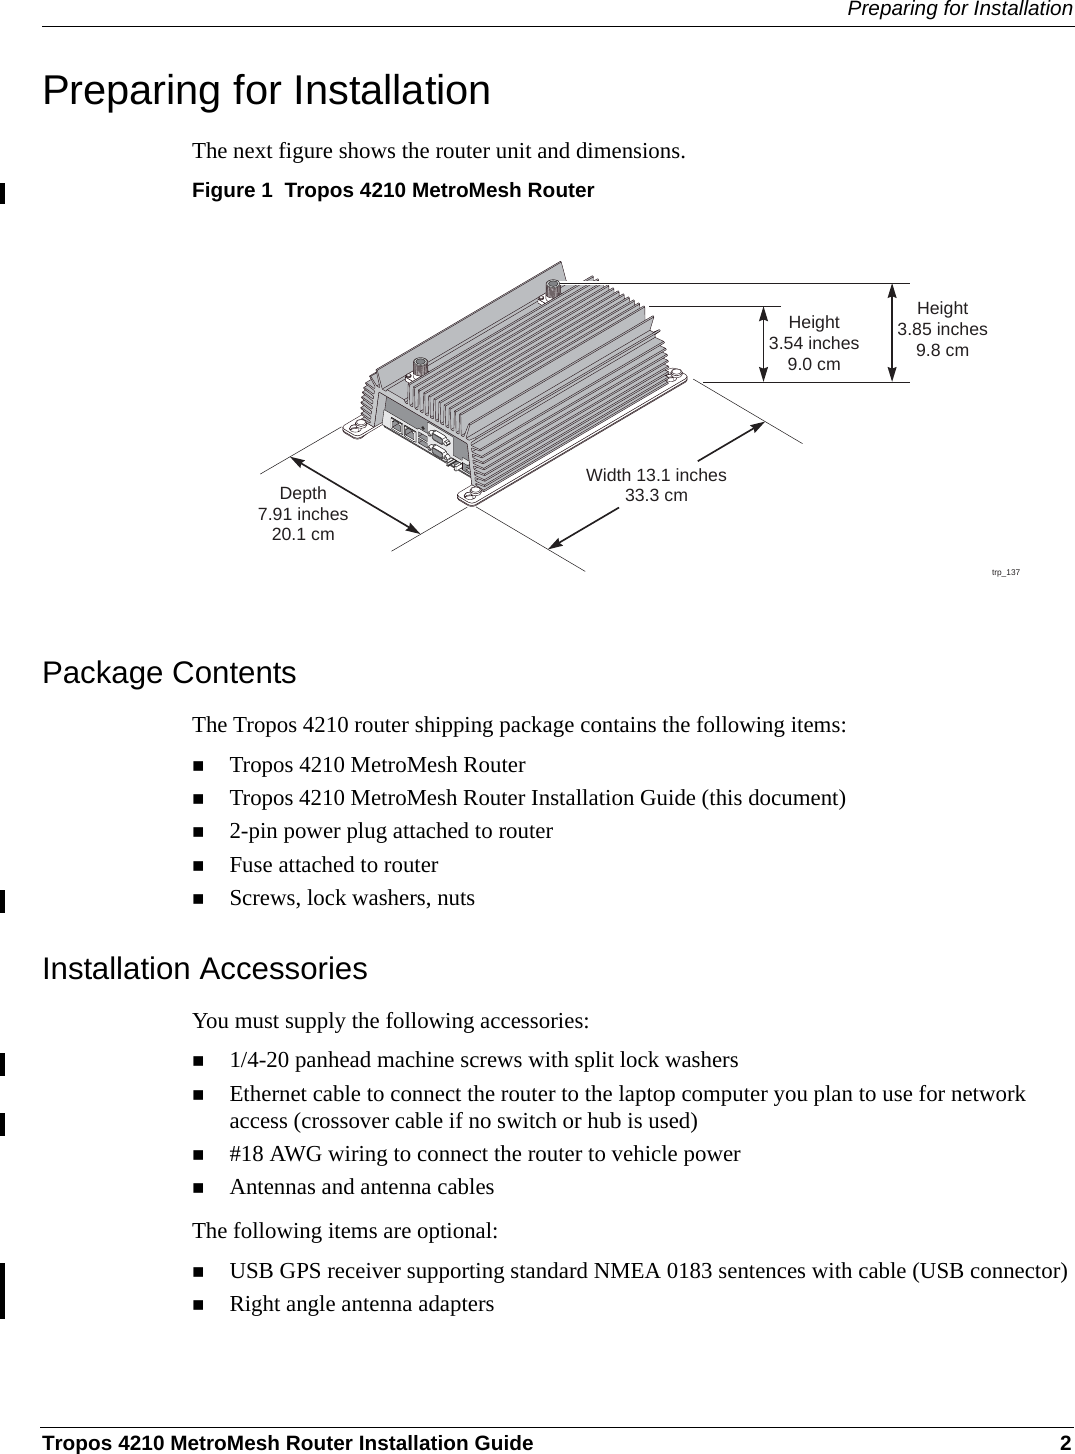 Preparing for InstallationTropos 4210 MetroMesh Router Installation Guide 2Preparing for InstallationThe next figure shows the router unit and dimensions.Figure 1  Tropos 4210 MetroMesh RouterPackage ContentsThe Tropos 4210 router shipping package contains the following items:Tropos 4210 MetroMesh RouterTropos 4210 MetroMesh Router Installation Guide (this document)2-pin power plug attached to routerFuse attached to routerScrews, lock washers, nutsInstallation AccessoriesYou must supply the following accessories:1/4-20 panhead machine screws with split lock washersEthernet cable to connect the router to the laptop computer you plan to use for network access (crossover cable if no switch or hub is used)#18 AWG wiring to connect the router to vehicle powerAntennas and antenna cablesThe following items are optional:USB GPS receiver supporting standard NMEA 0183 sentences with cable (USB connector)Right angle antenna adapterstrp_137Width 13.1 inches33.3 cmHeight3.85 inches9.8 cmHeight3.54 inches9.0 cmDepth7.91 inches20.1 cm